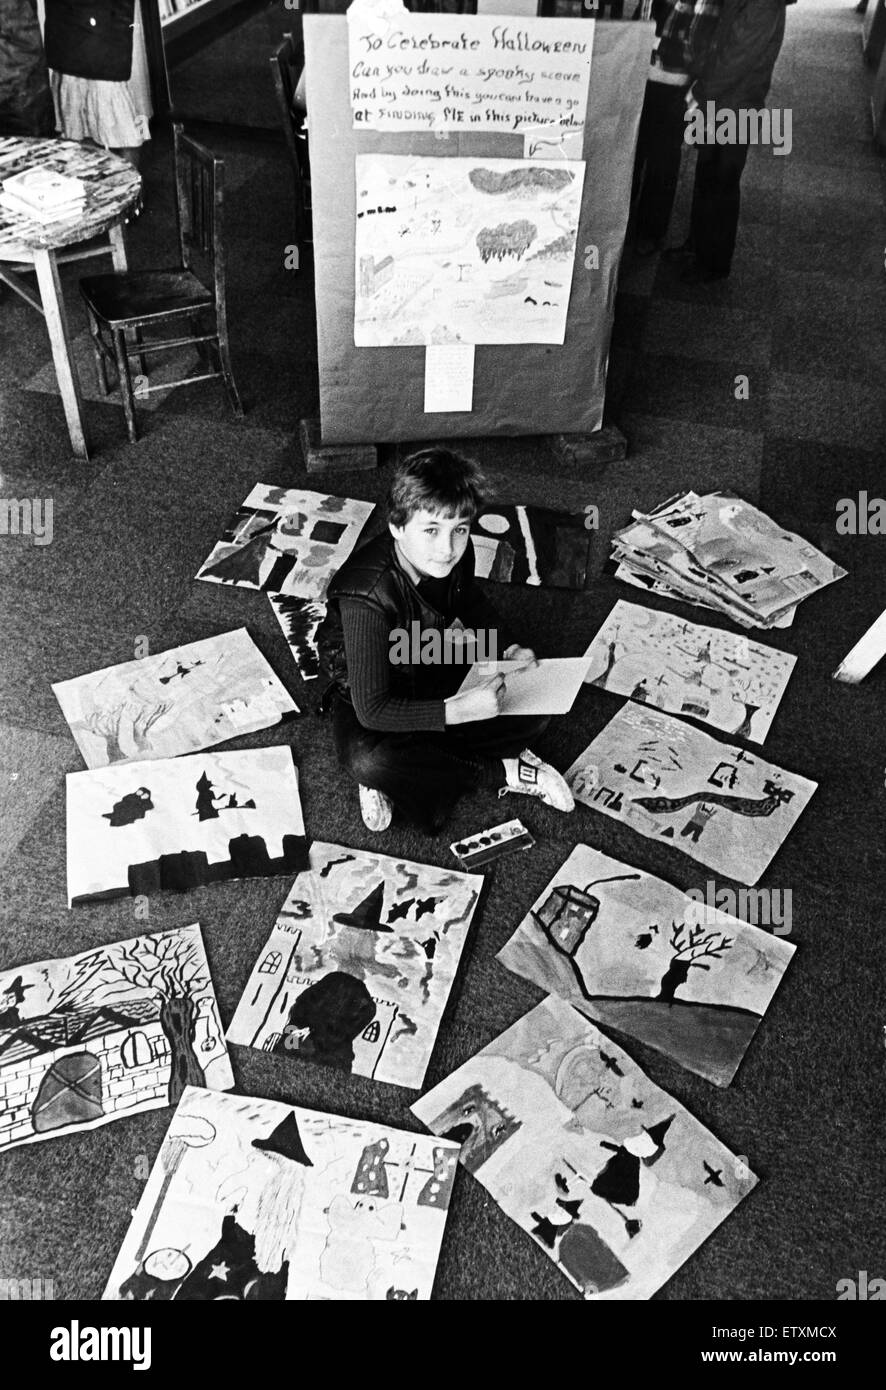 A young boy sitting on the floor among paintings and drawings which have been made by children for Halloween. 29th October 1980. Stock Photo